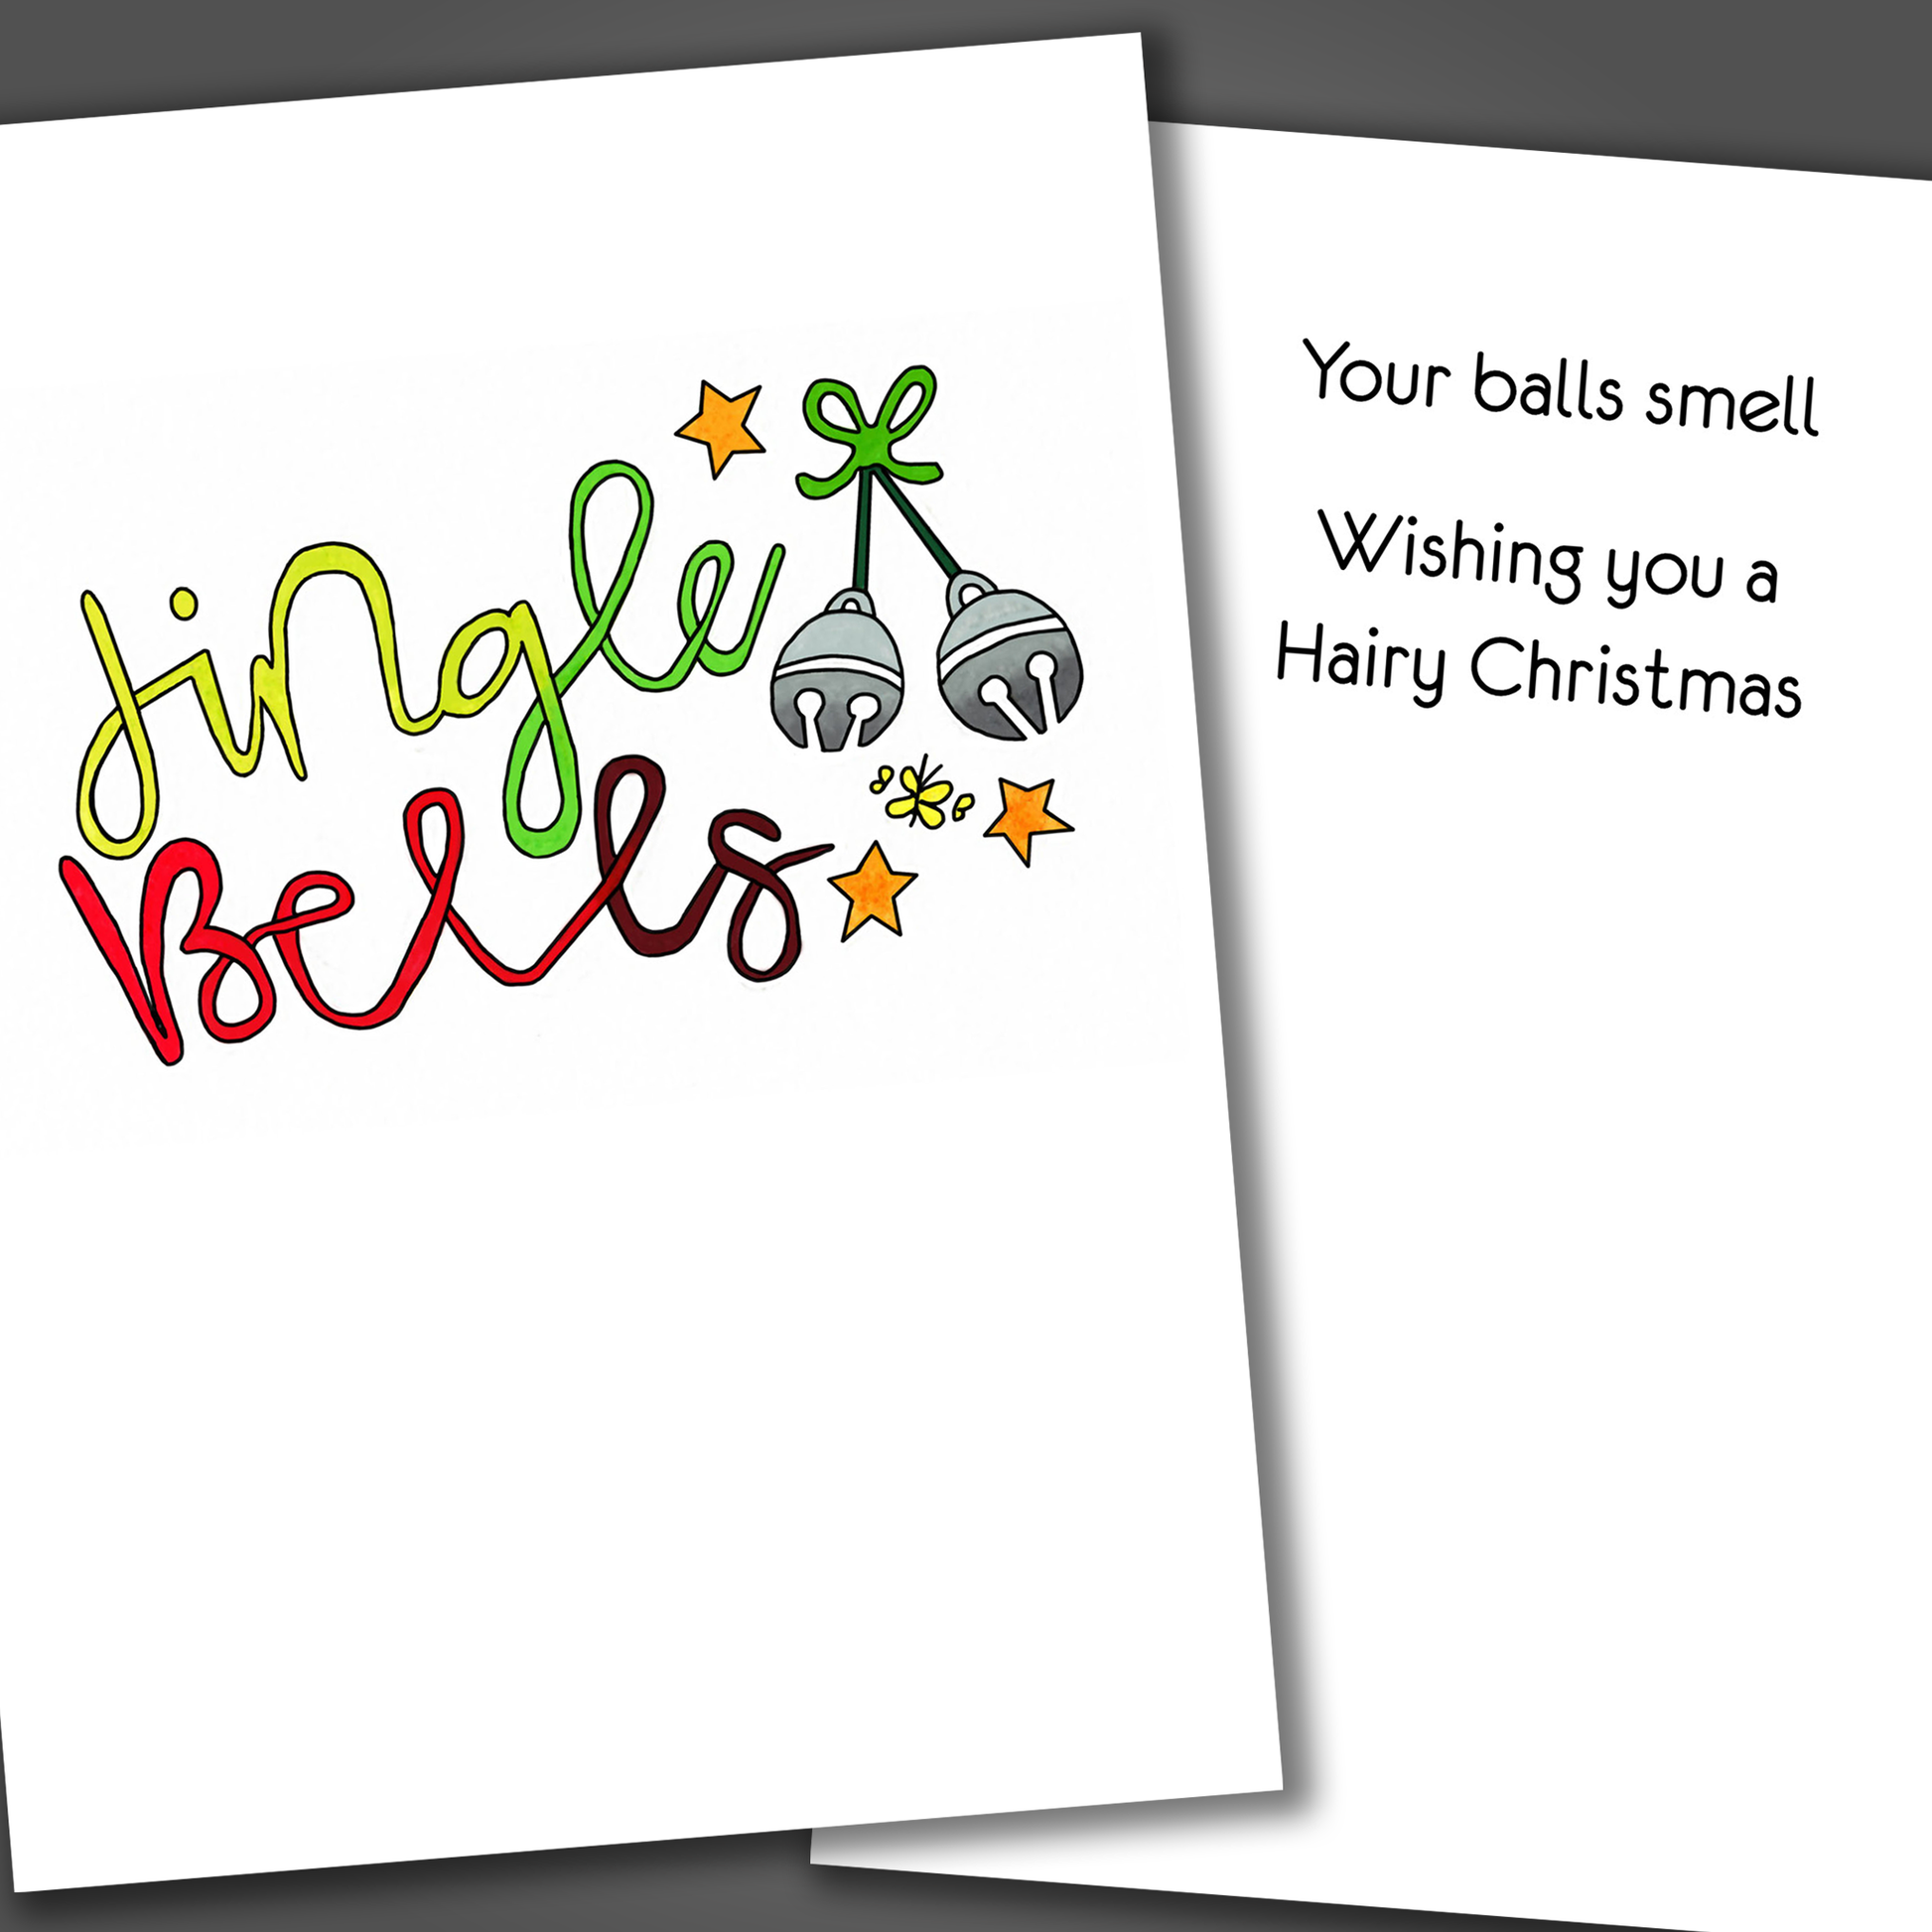 Funny Christmas card with jingle bells drawn on the front of the card. Inside is a joke that says your balls smell, Hairy Christmas!